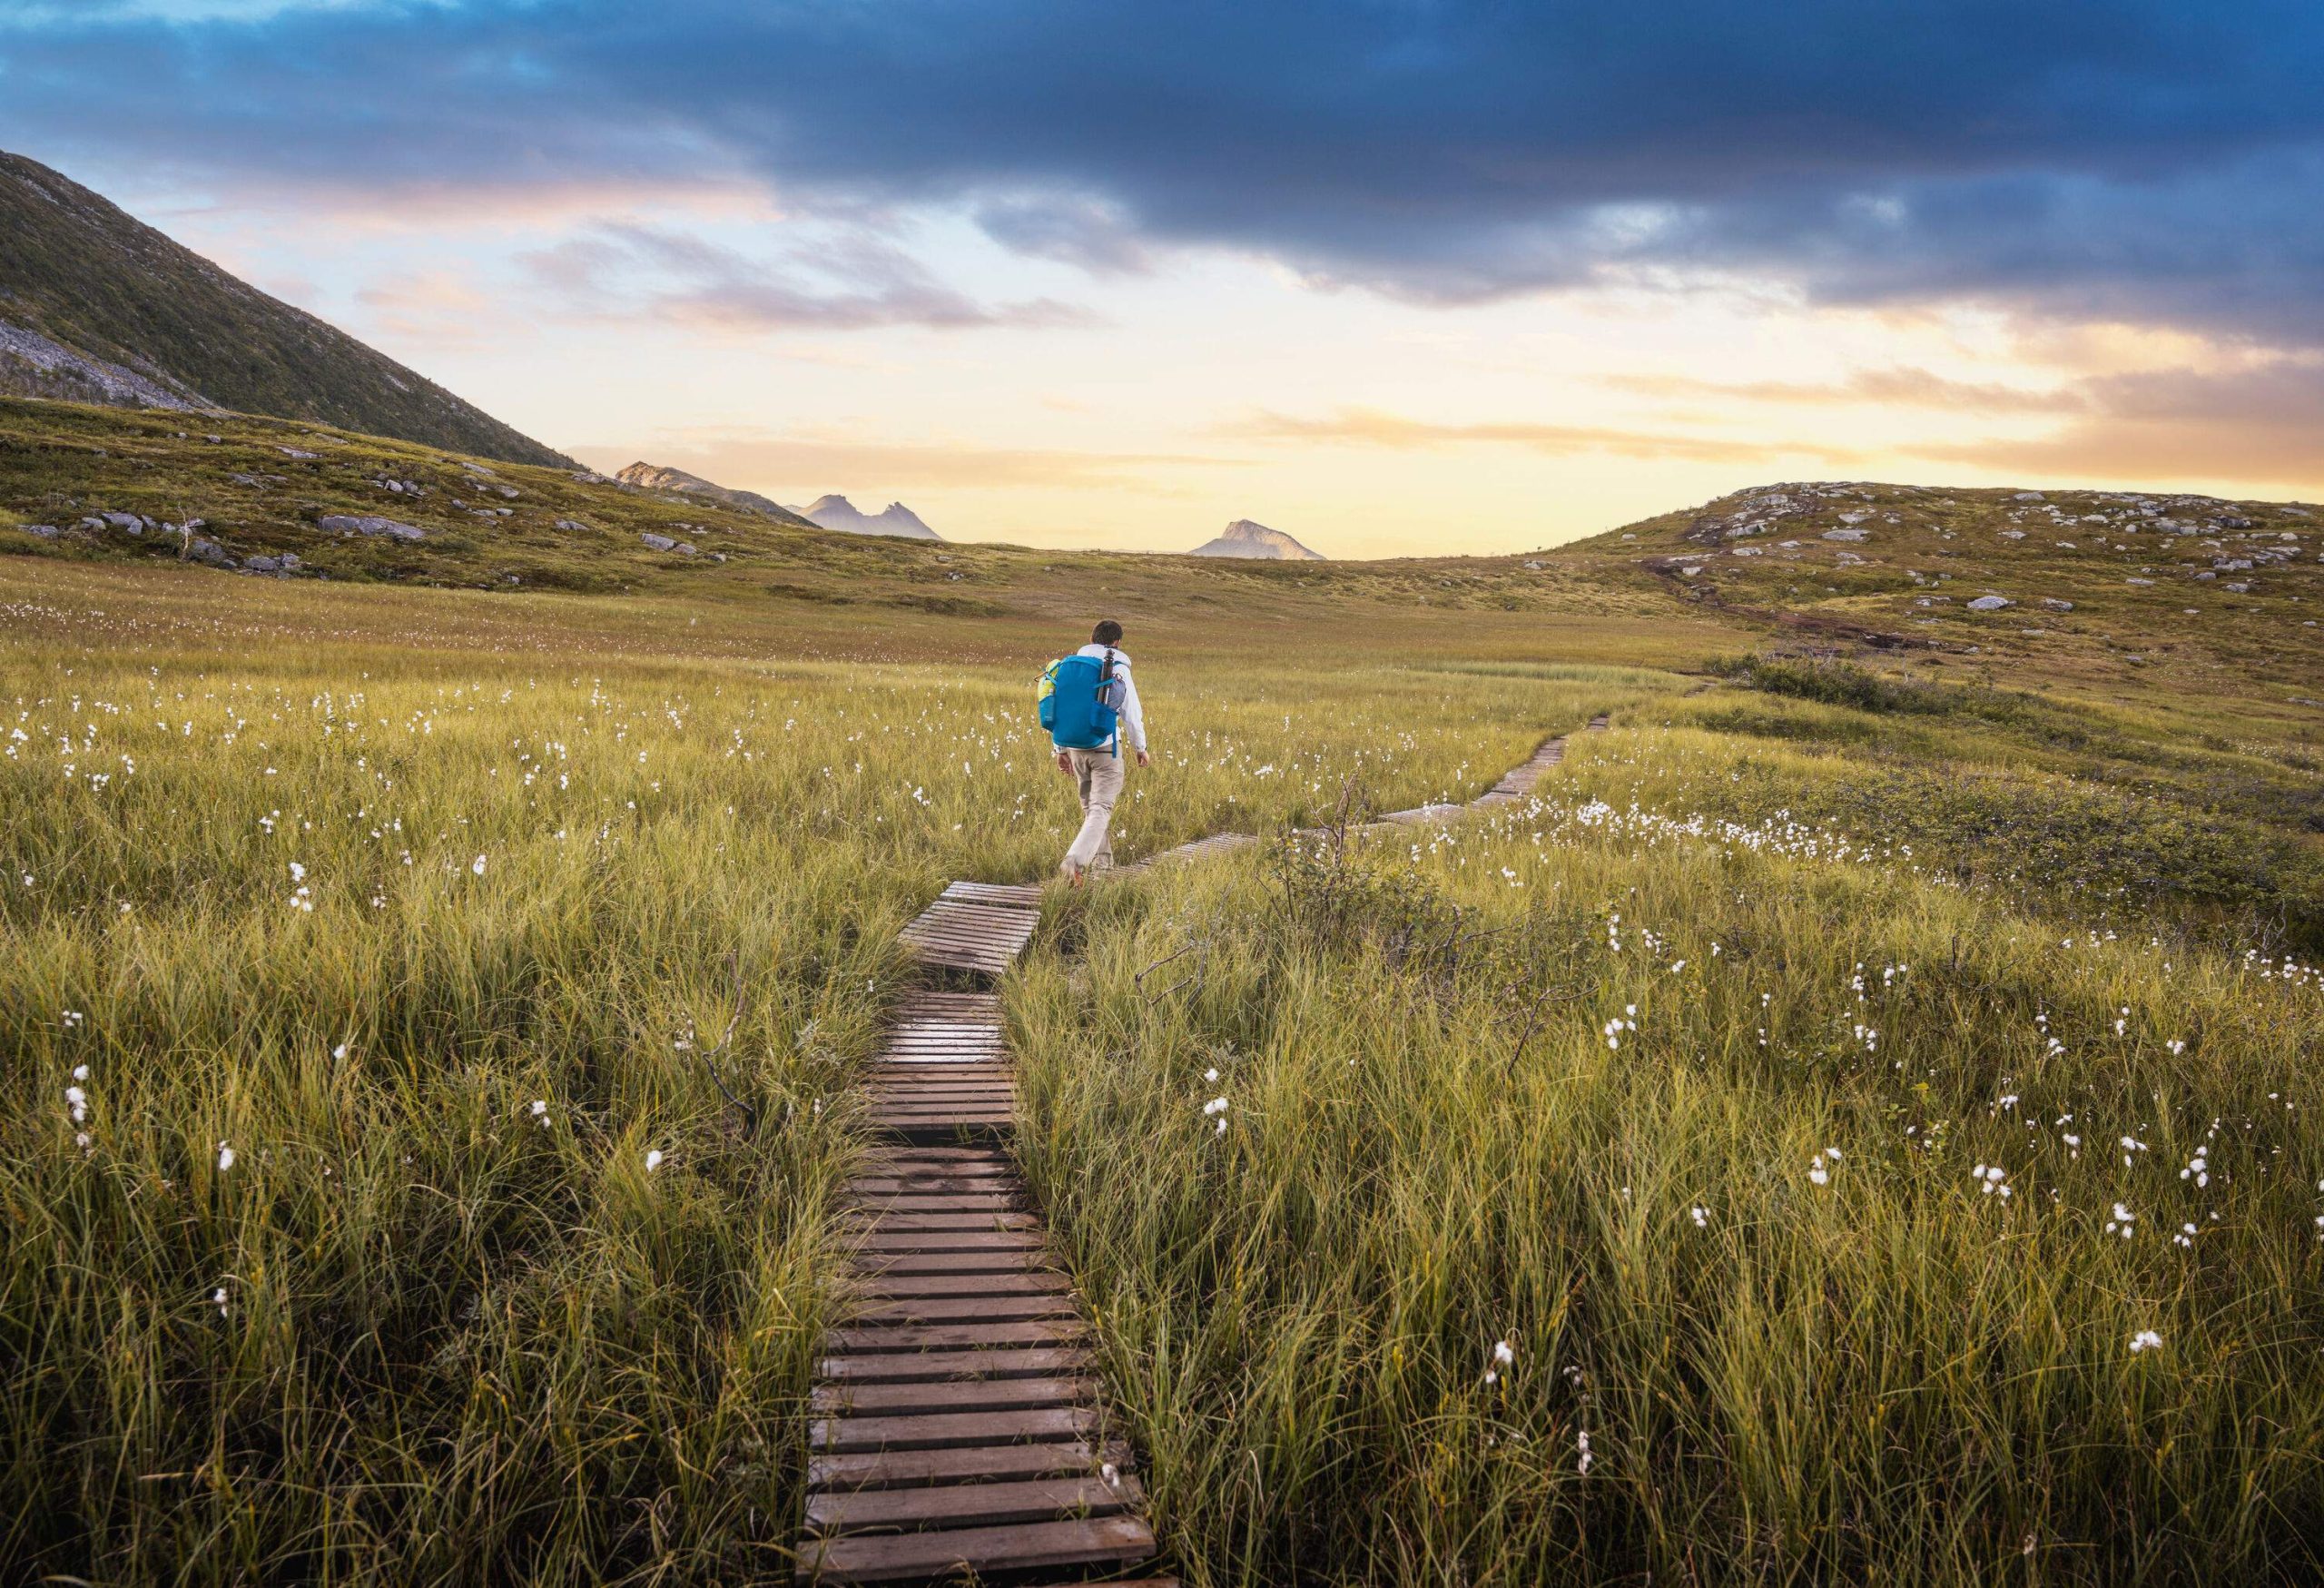 A hiker traverses a narrow wood path across a grass field with white flowers.